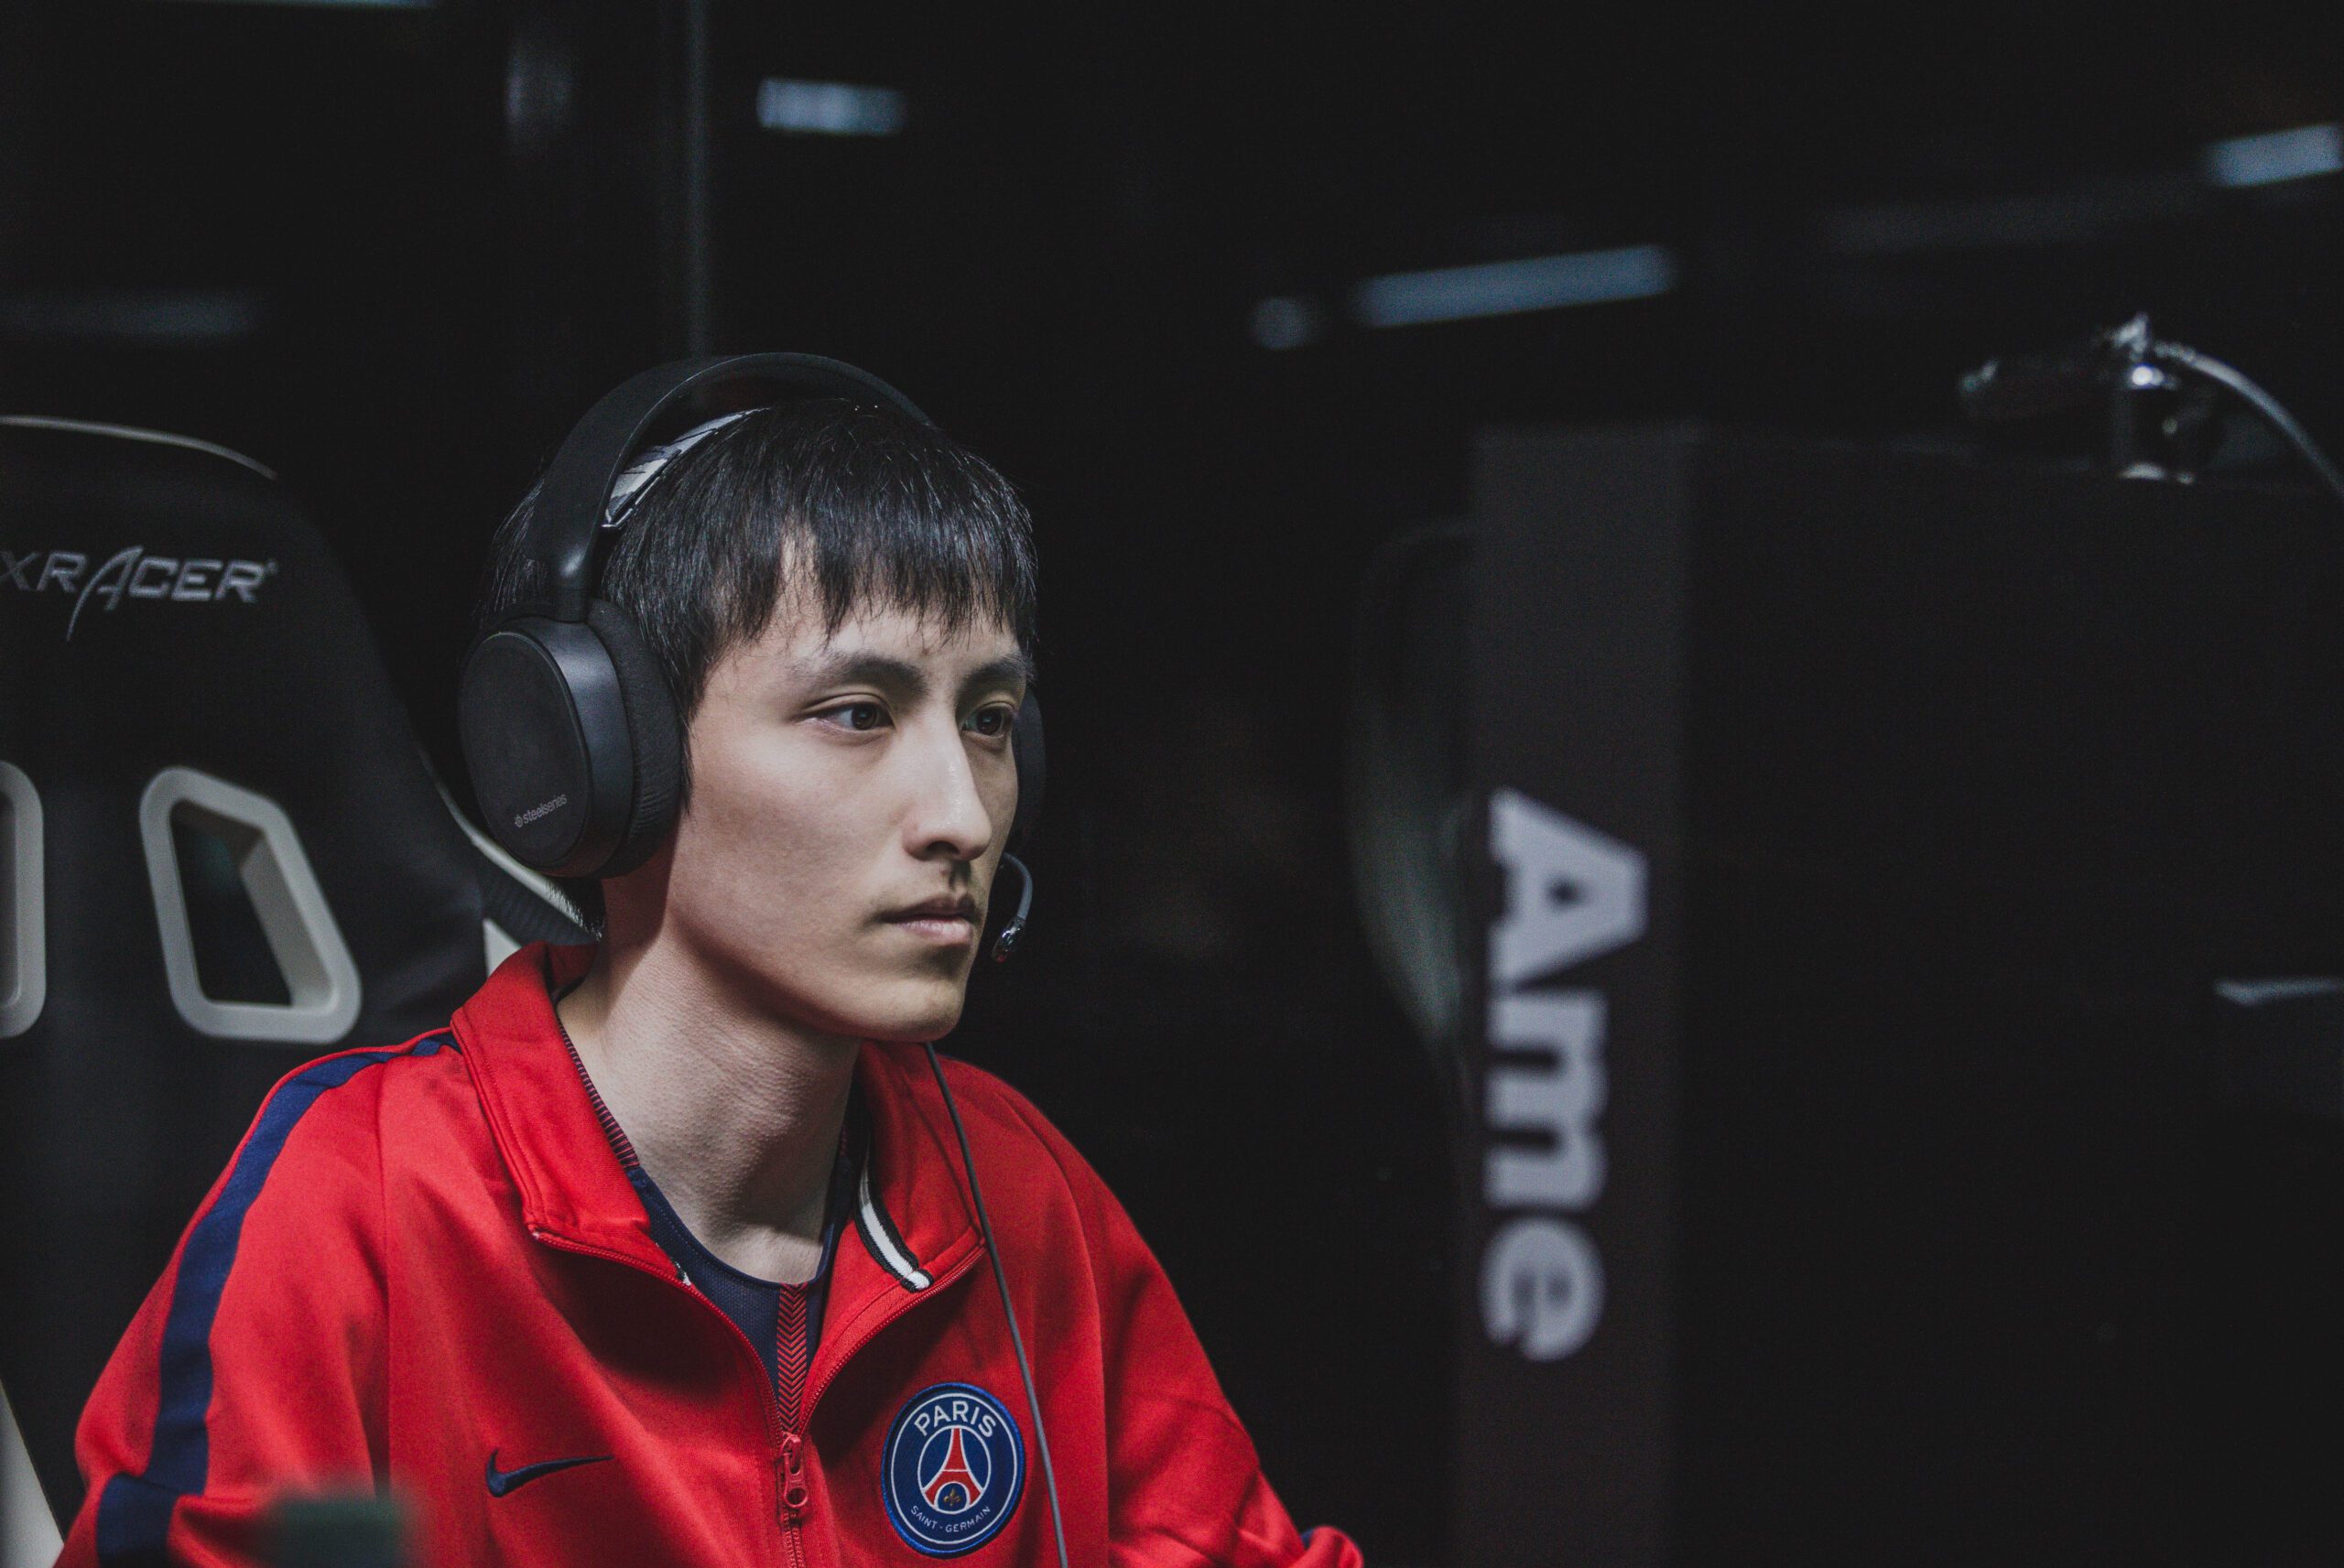 Ame returns to compete in Dota 2